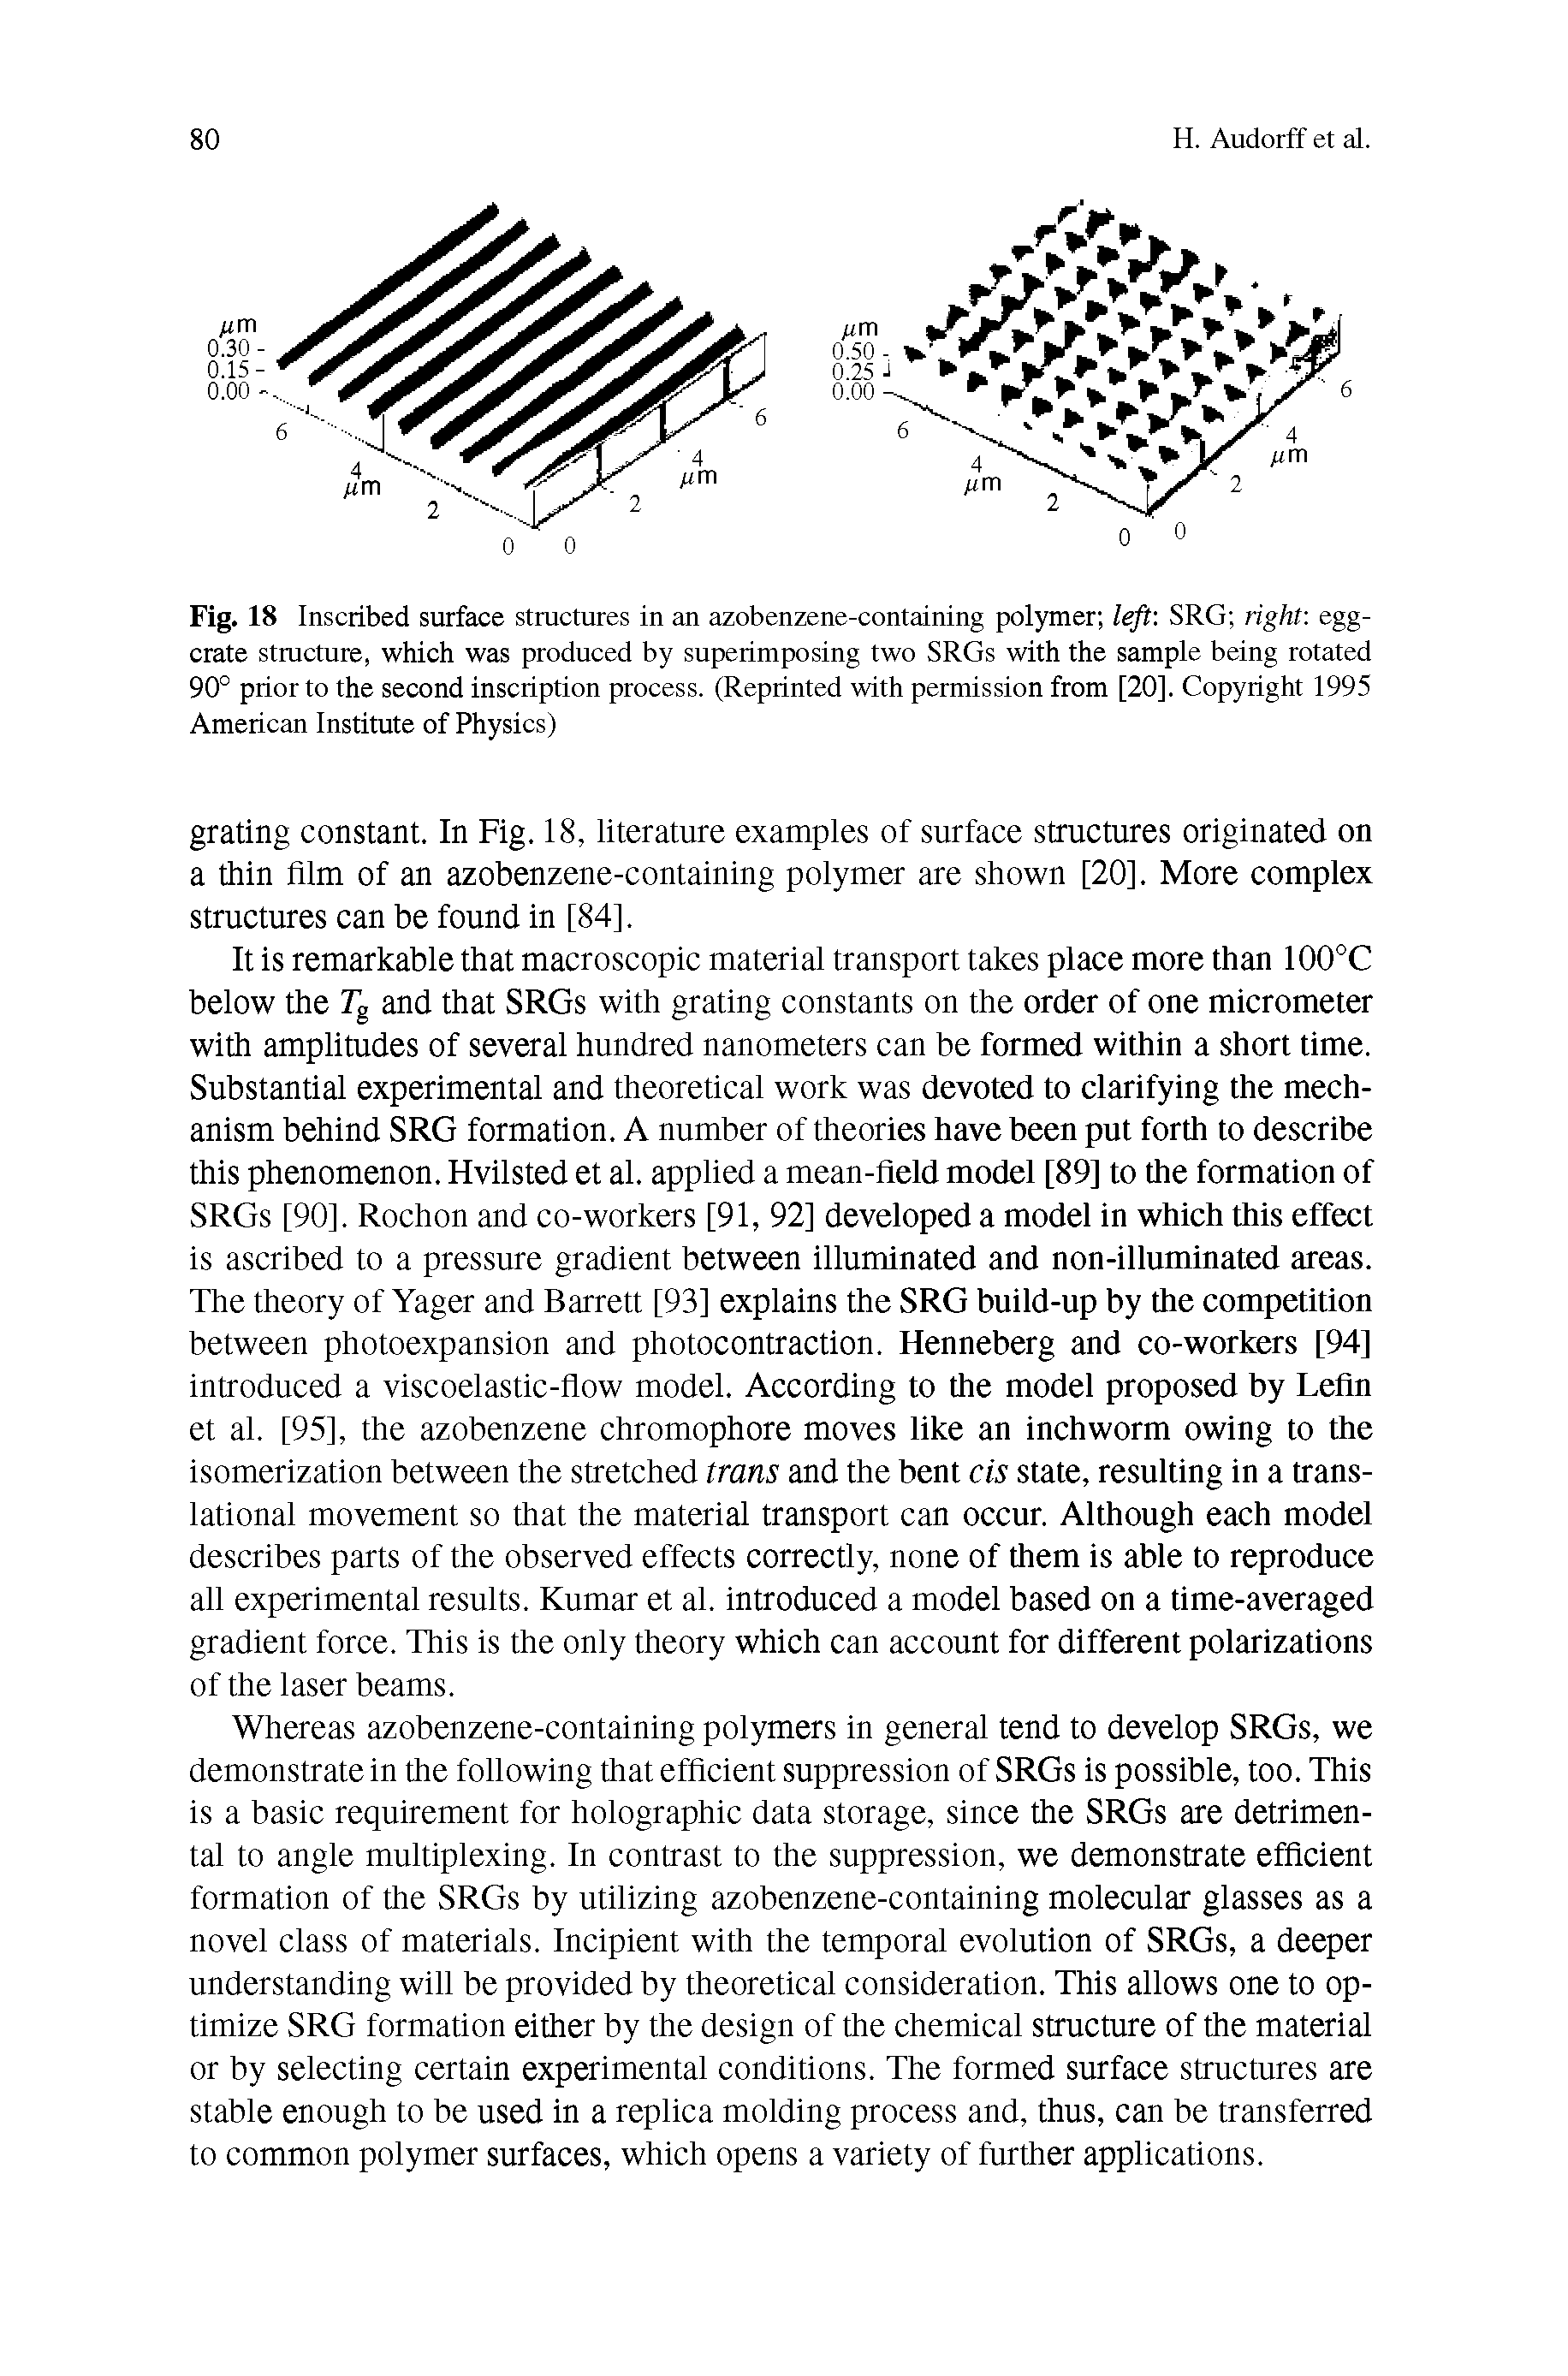 Fig. 18 Inscribed surface structures in an azobenzene-containing polymer left SRG right egg-crate structure, which was produced by superimposing two SRGs with the sample being rotated 90° prior to the second inscription process. (Reprinted with permission from [20]. Copyright 1995 American Institute of Physics)...